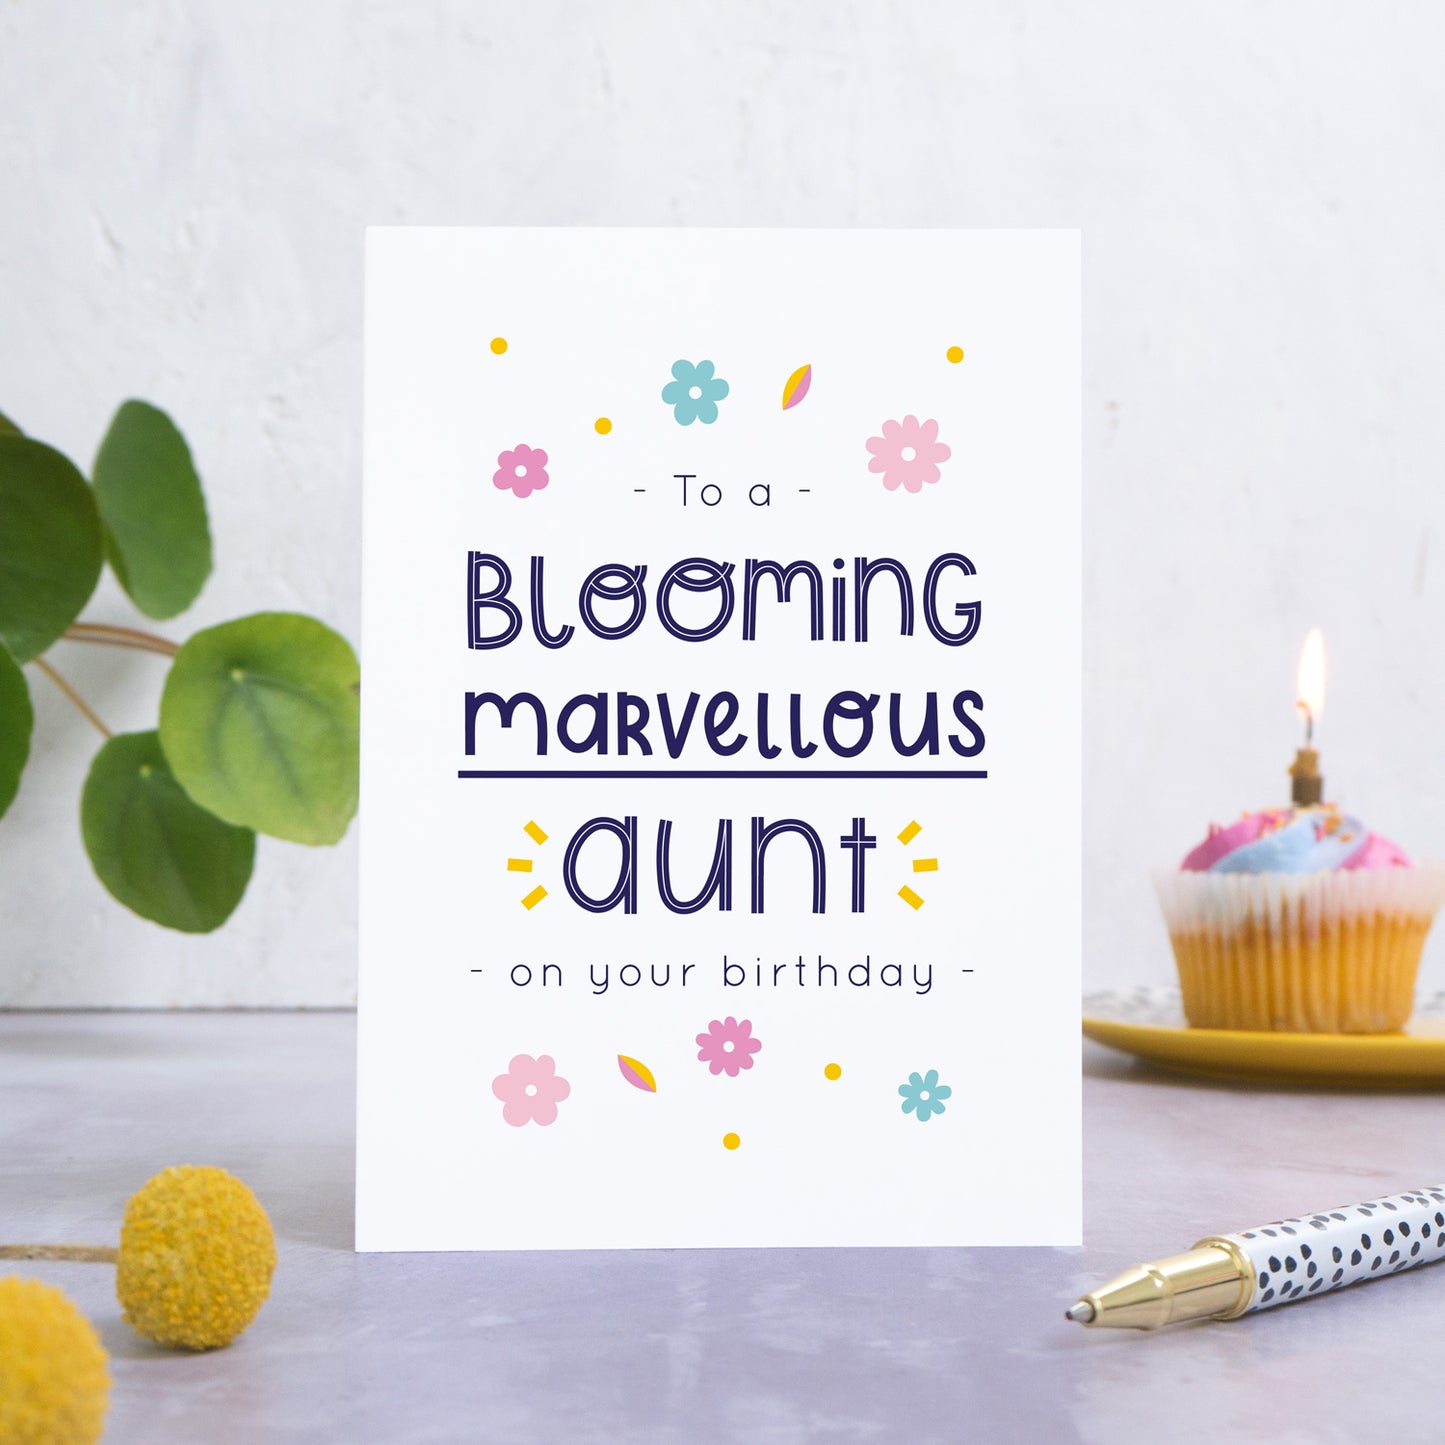 A blooming marvellous aunt birthday card photographed standing in front of a white background. In the background is a plant and a birthday cupcake and with a candle. In the foreground are two yellow flowers and a spotty pen.